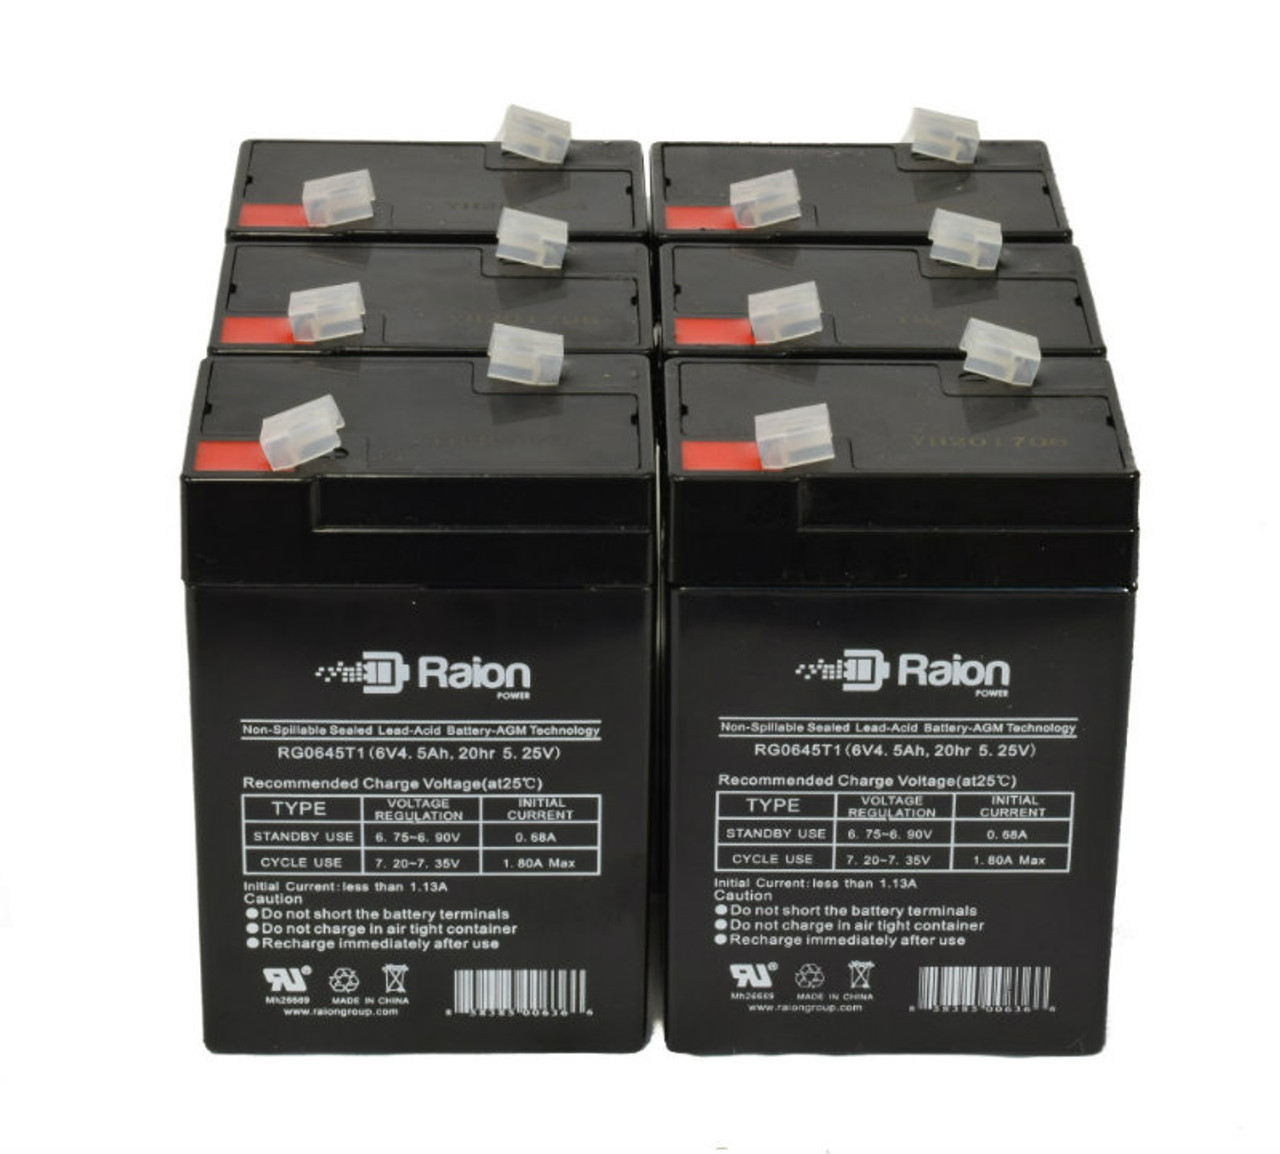 Raion Power RG0645T1 6V 4.5Ah Replacement Medical Equipment Battery for Castle Co 4900 Shampaine Surgical Table - 6 Pack